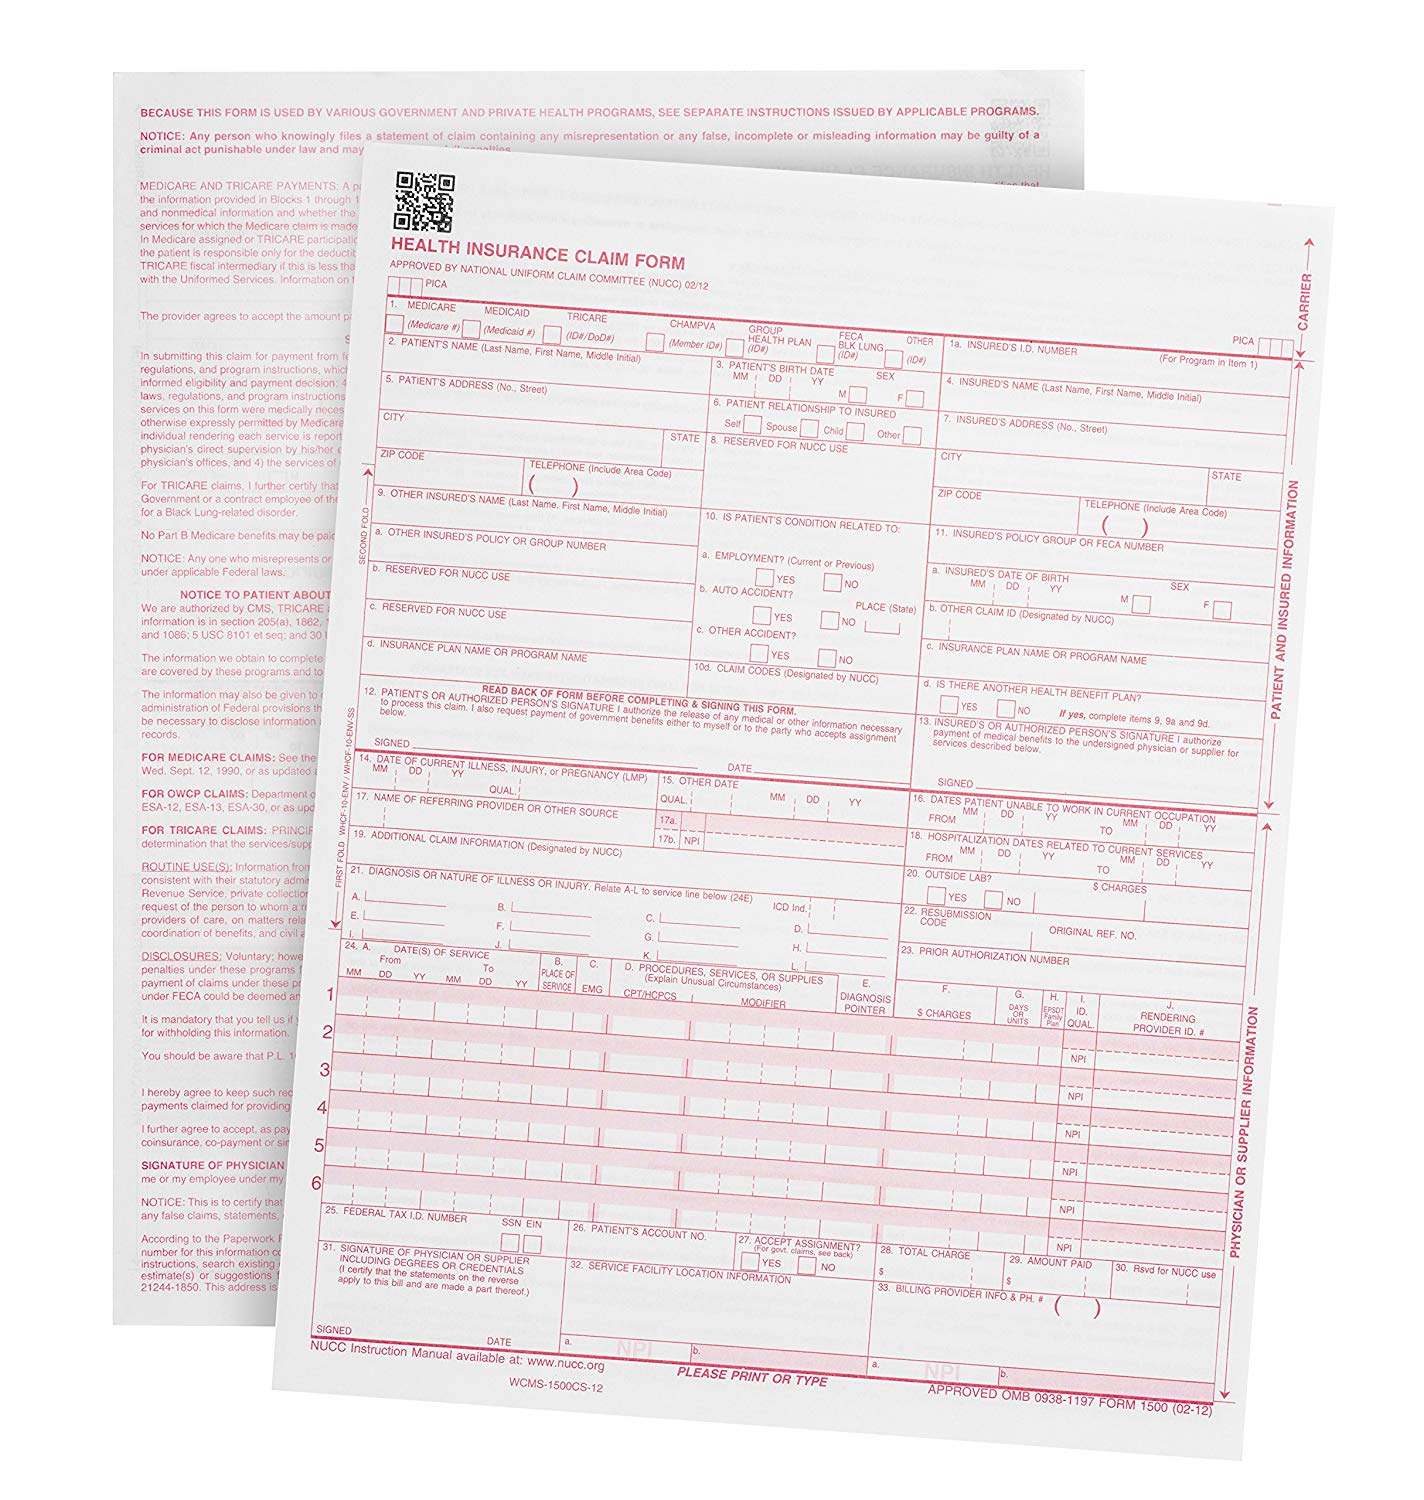 CMS-1500 Medical Health Insurance Claim Forms - BuyBlankChecks.com by Diversified Company